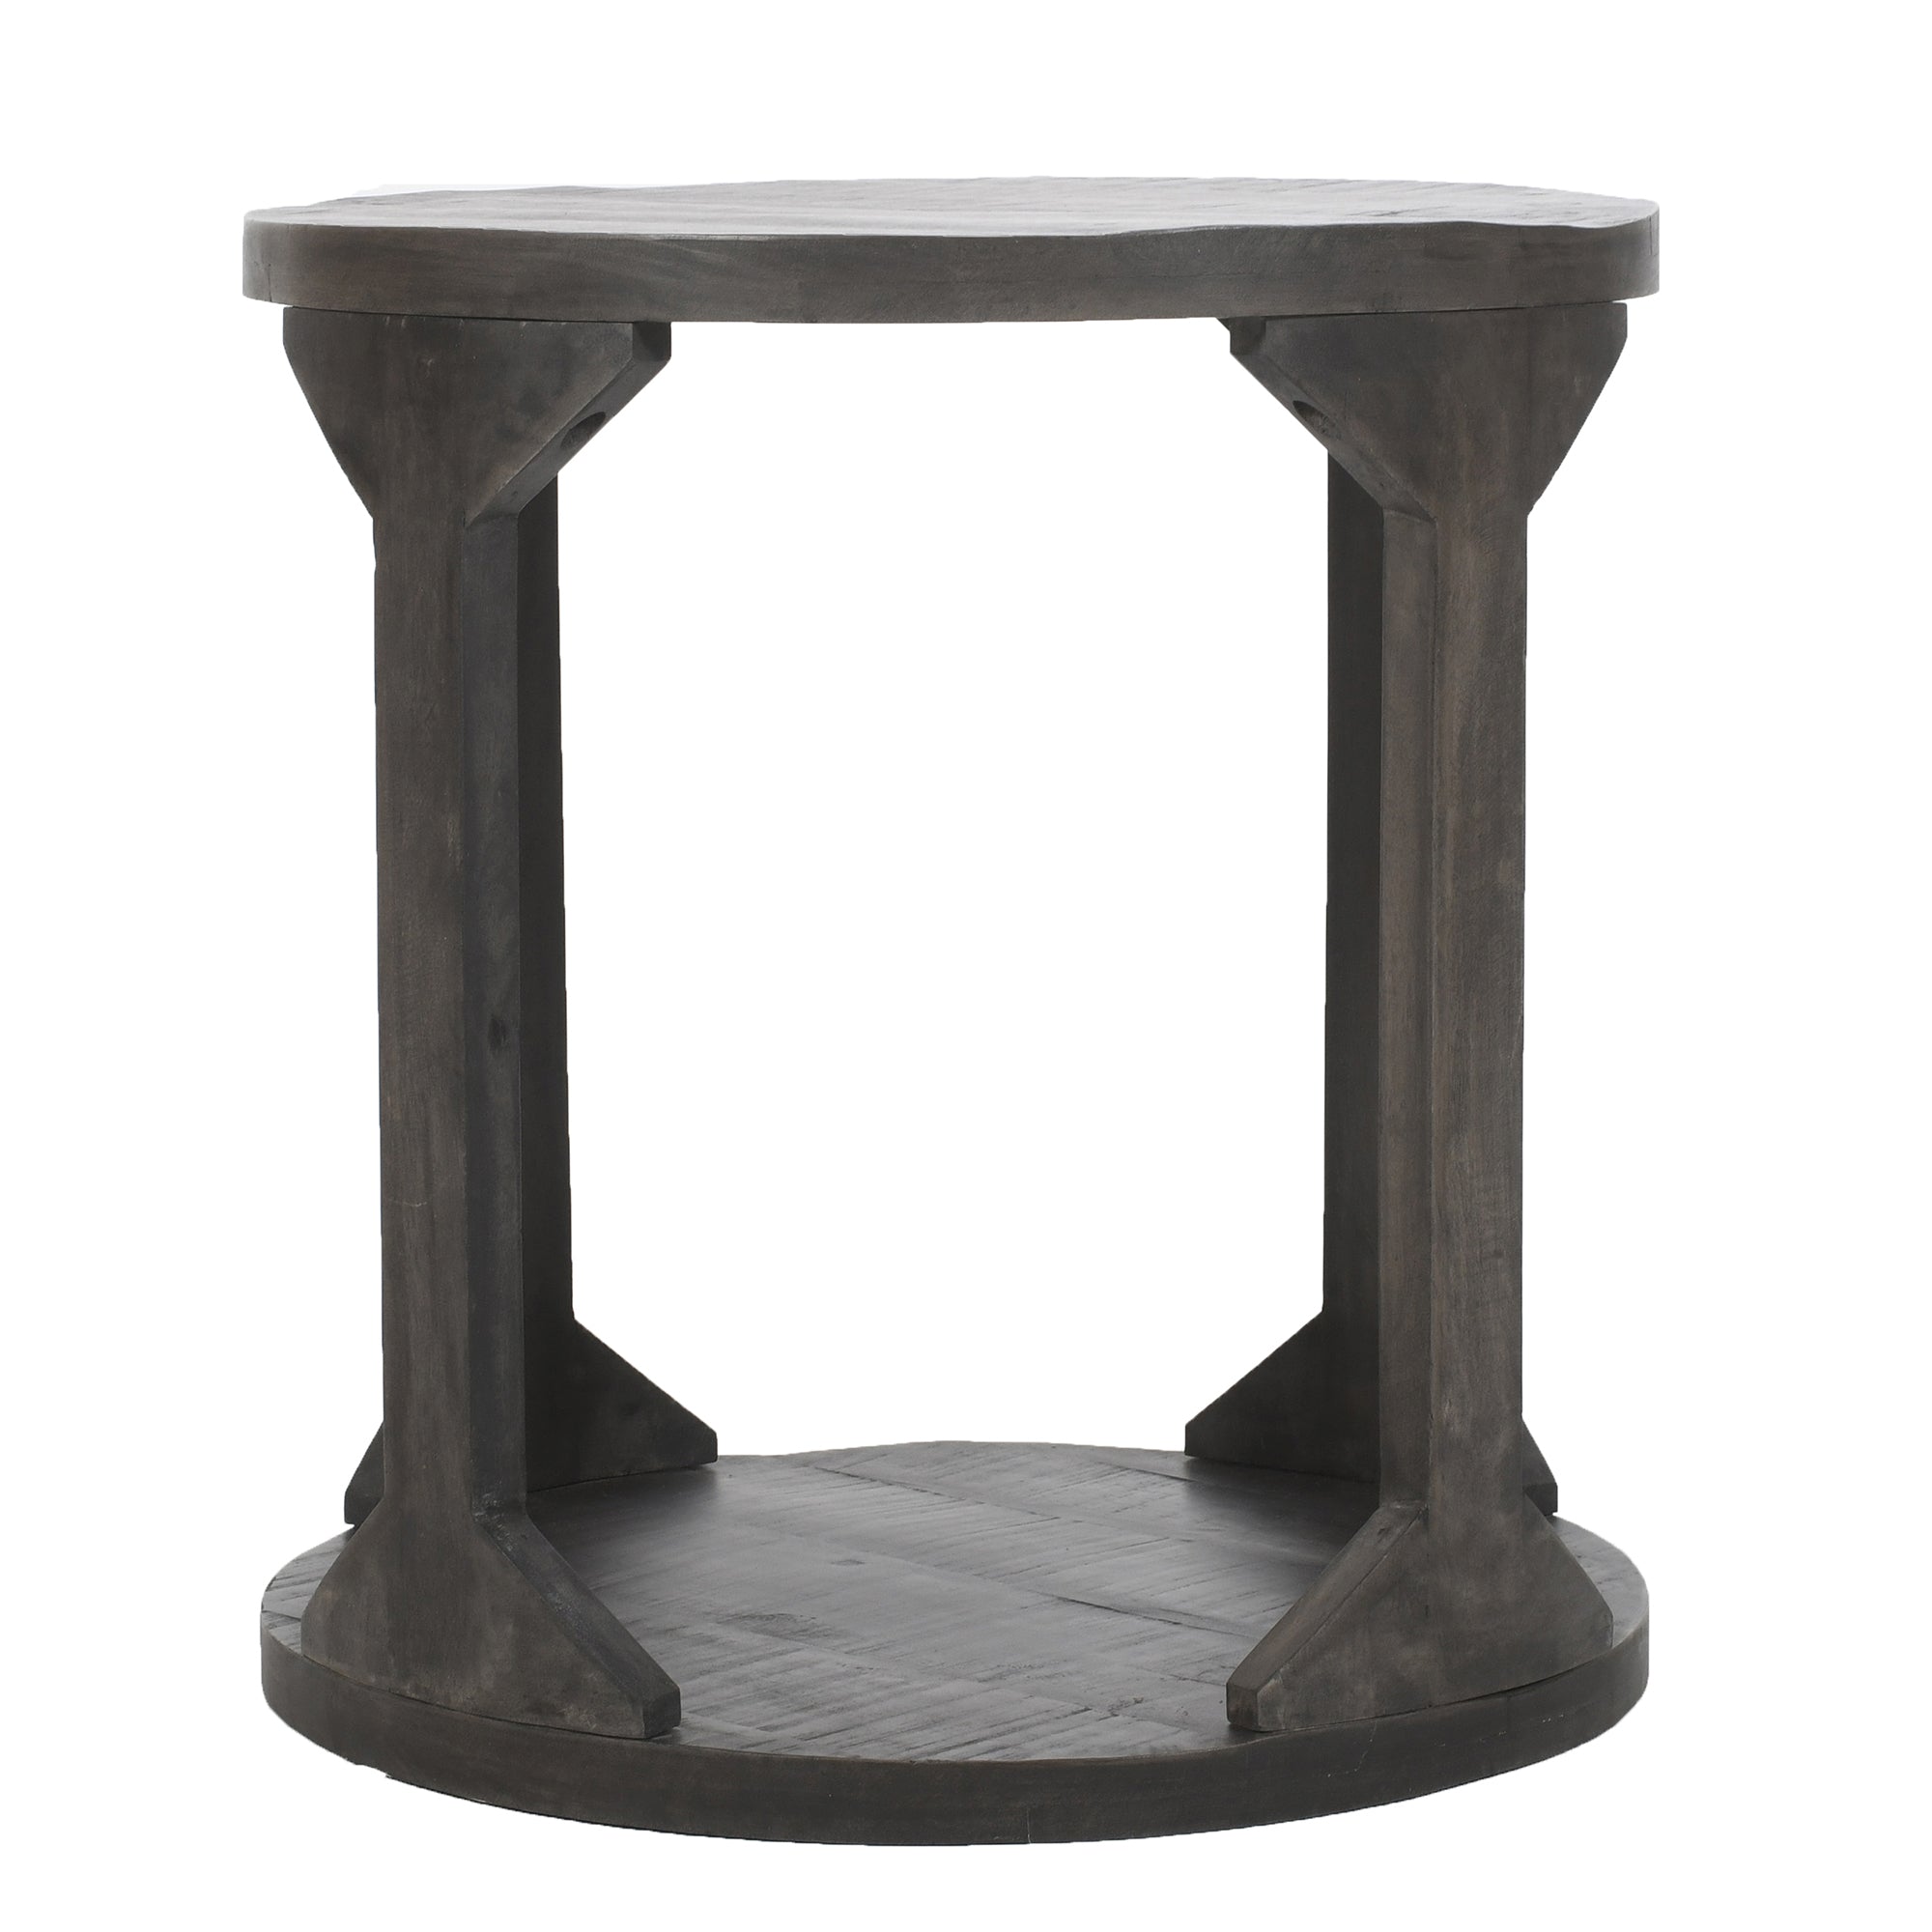 Avni Round Accent Table in Distressed Natural